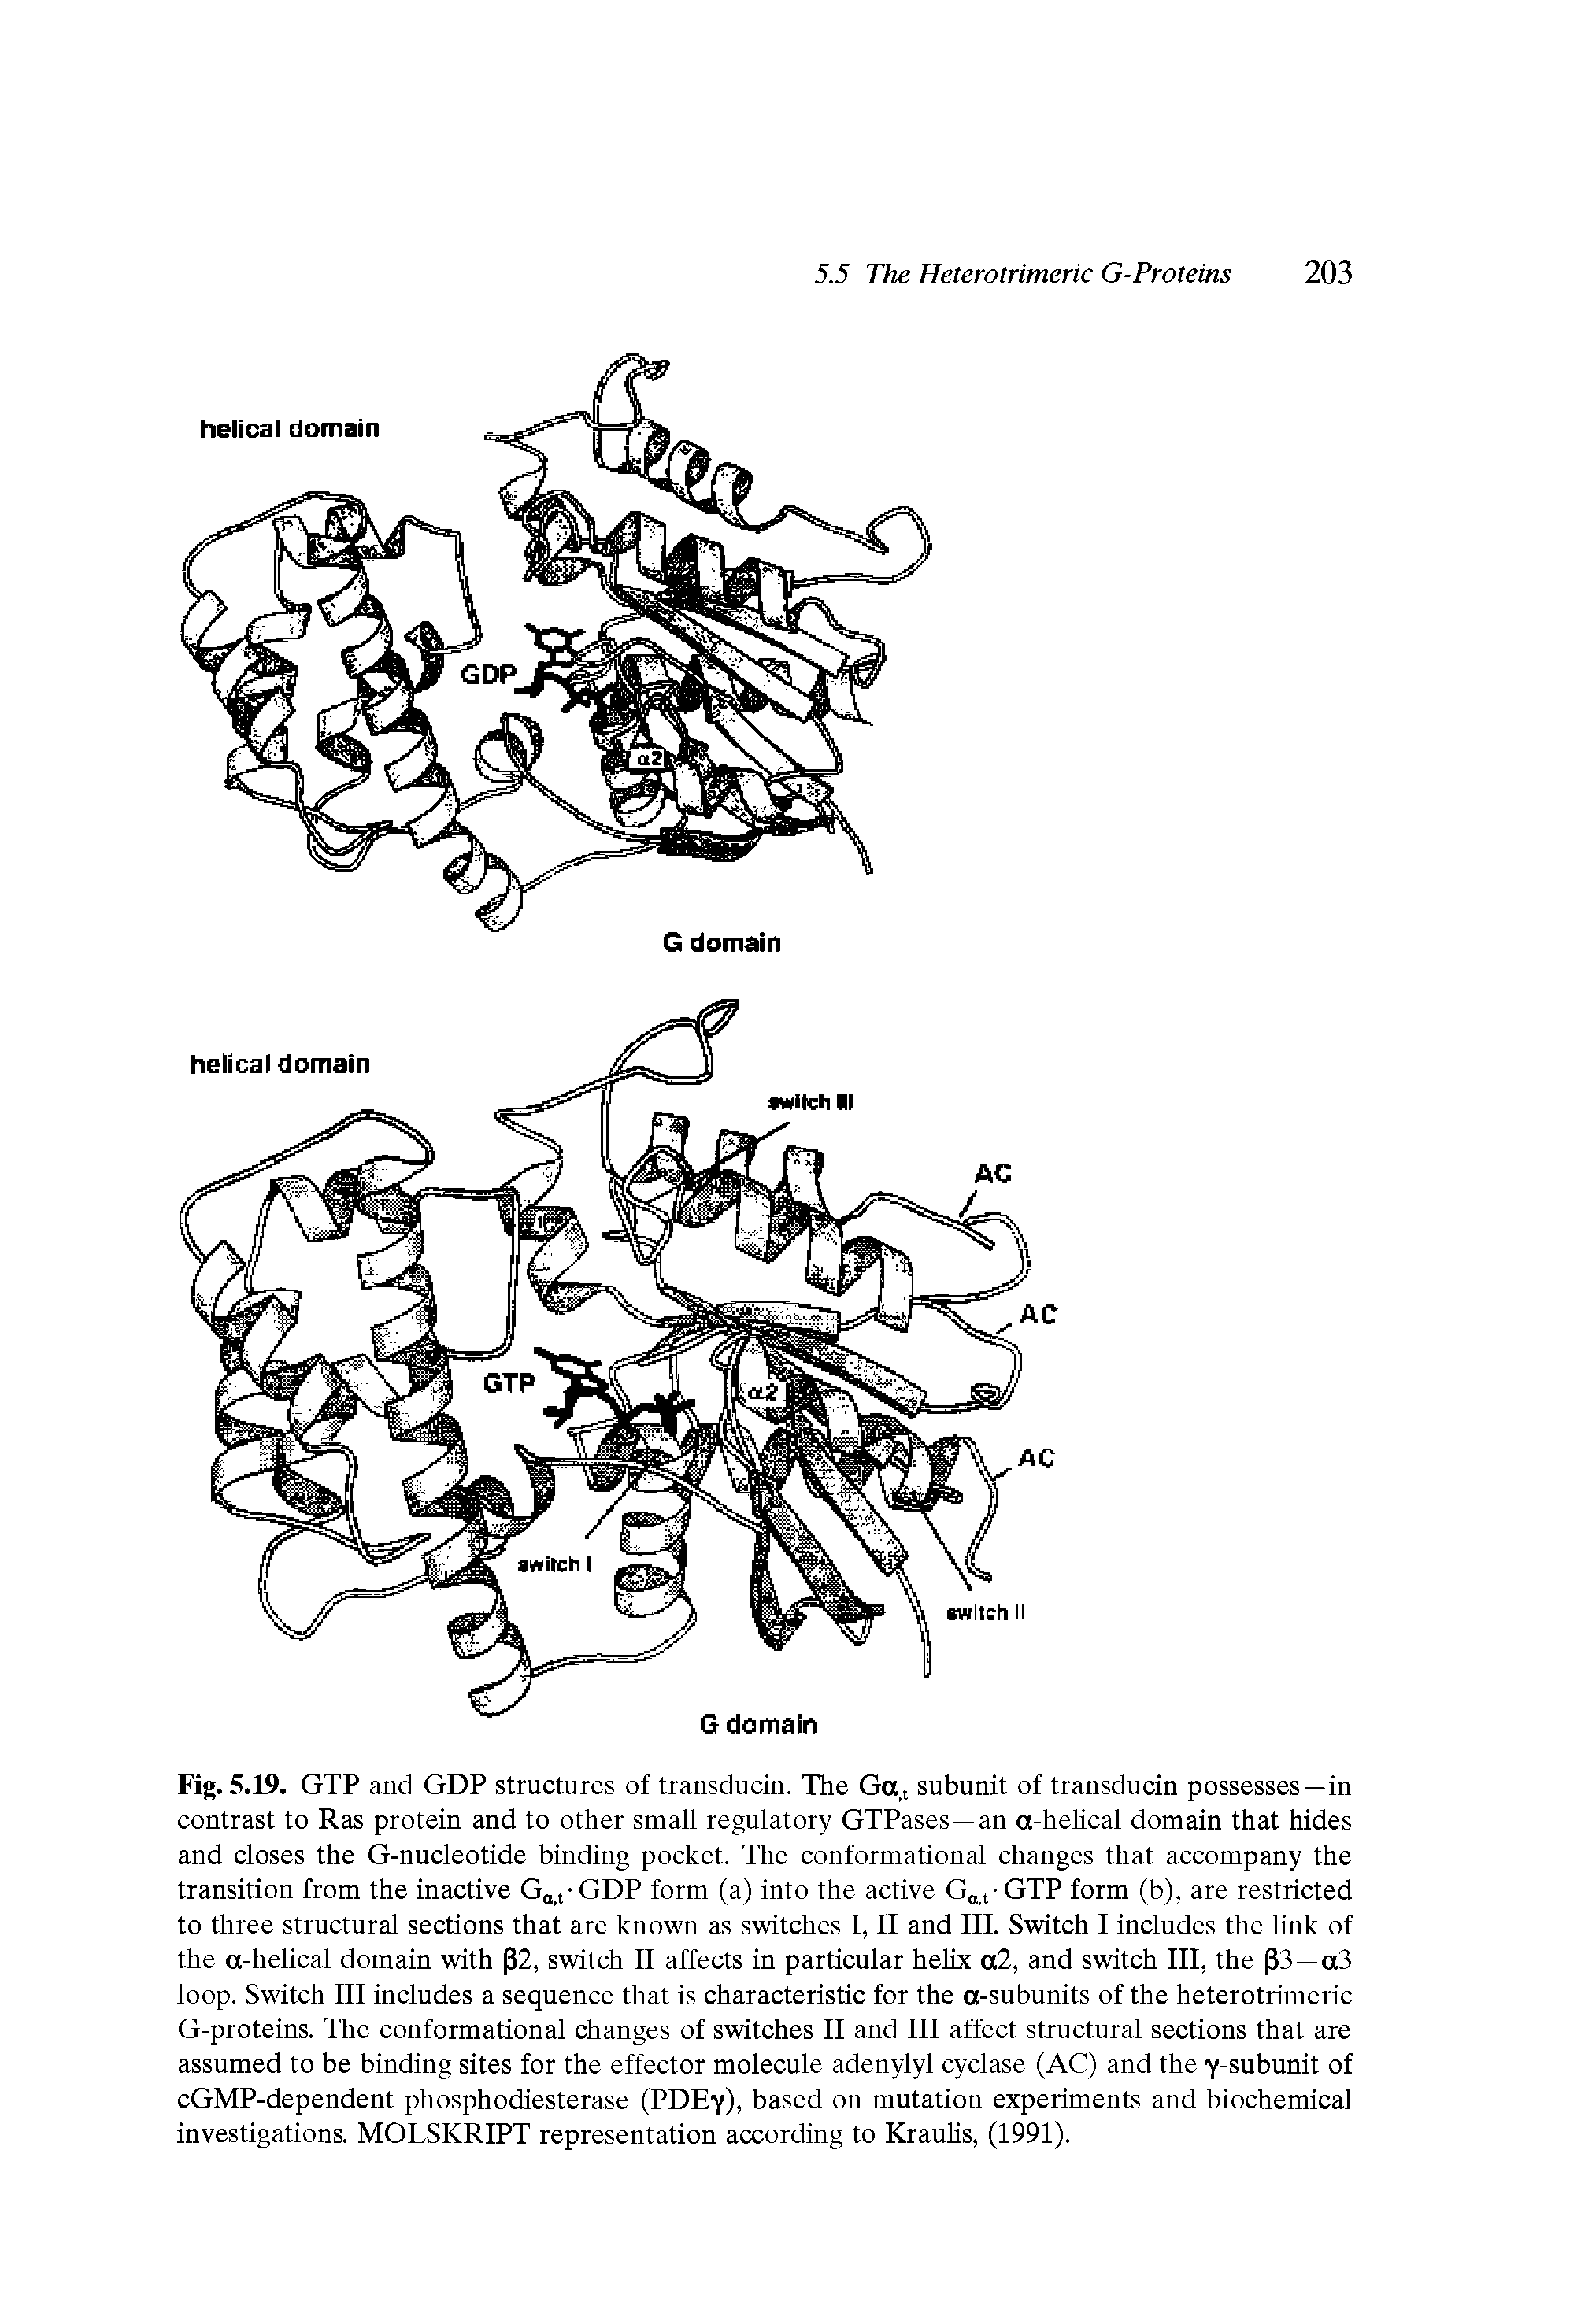 Fig. 5.19. GTP and GDP structures of transducin. The Ga,t subunit of transducin possesses—in contrast to Ras protein and to other small regulatory GTPases —an a-hehcal domain that hides and closes the G-nucleotide binding pocket. The conformational changes that accompany the transition from the inactive G t GDP form (a) into the active G t GTP form (b), are restricted to three structural sections that are known as switches I, II and III. Switch I includes the link of the a-helical domain with P2, switch II affects in particular hehx a2, and switch III, the pS—a3 loop. Switch III includes a sequence that is characteristic for the a-subunits of the heterotrimeric G-proteins. The conformational changes of switches II and III affect structural sections that are assumed to be binding sites for the effector molecule adenylyl cyclase (AC) and the y-subunit of cGMP-dependent phosphodiesterase (PDEy), based on mutation experiments and biochemical investigations. MOLSKRIPT representation according to Krauhs, (1991).